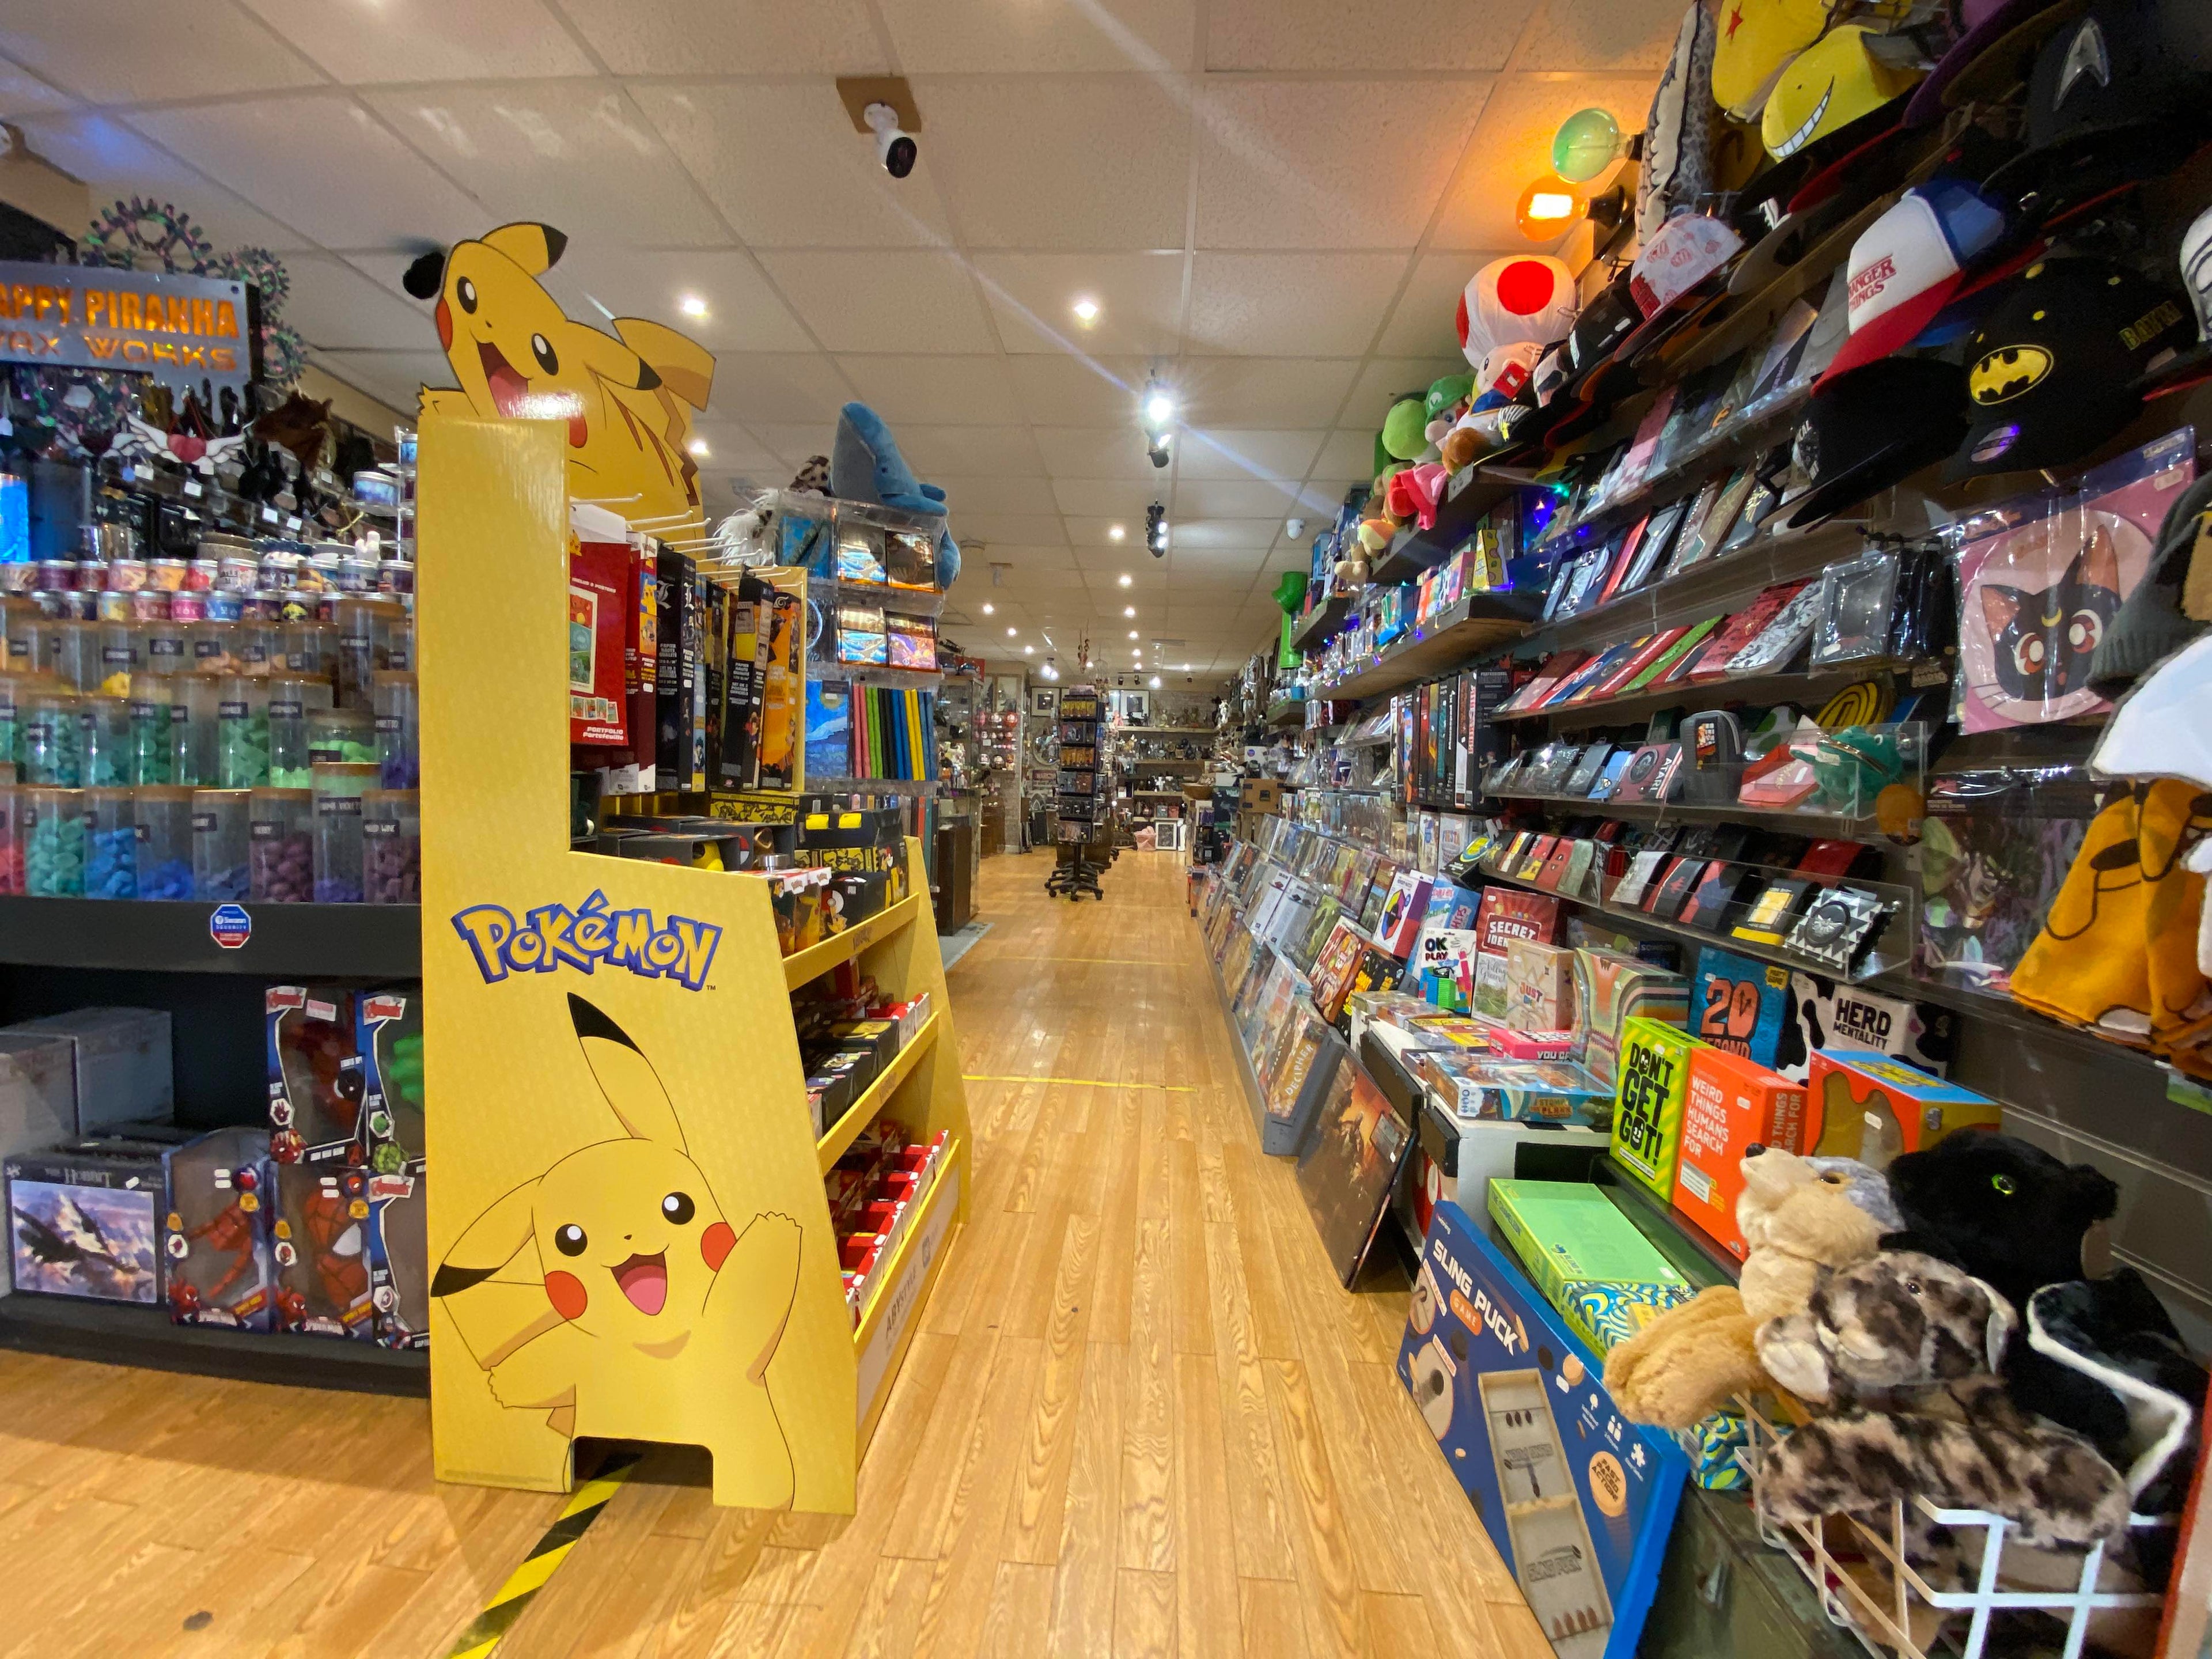 A view of the Happy Piranha store as you first enter inside, featuring board games, wallets and pop culture memorabilia.